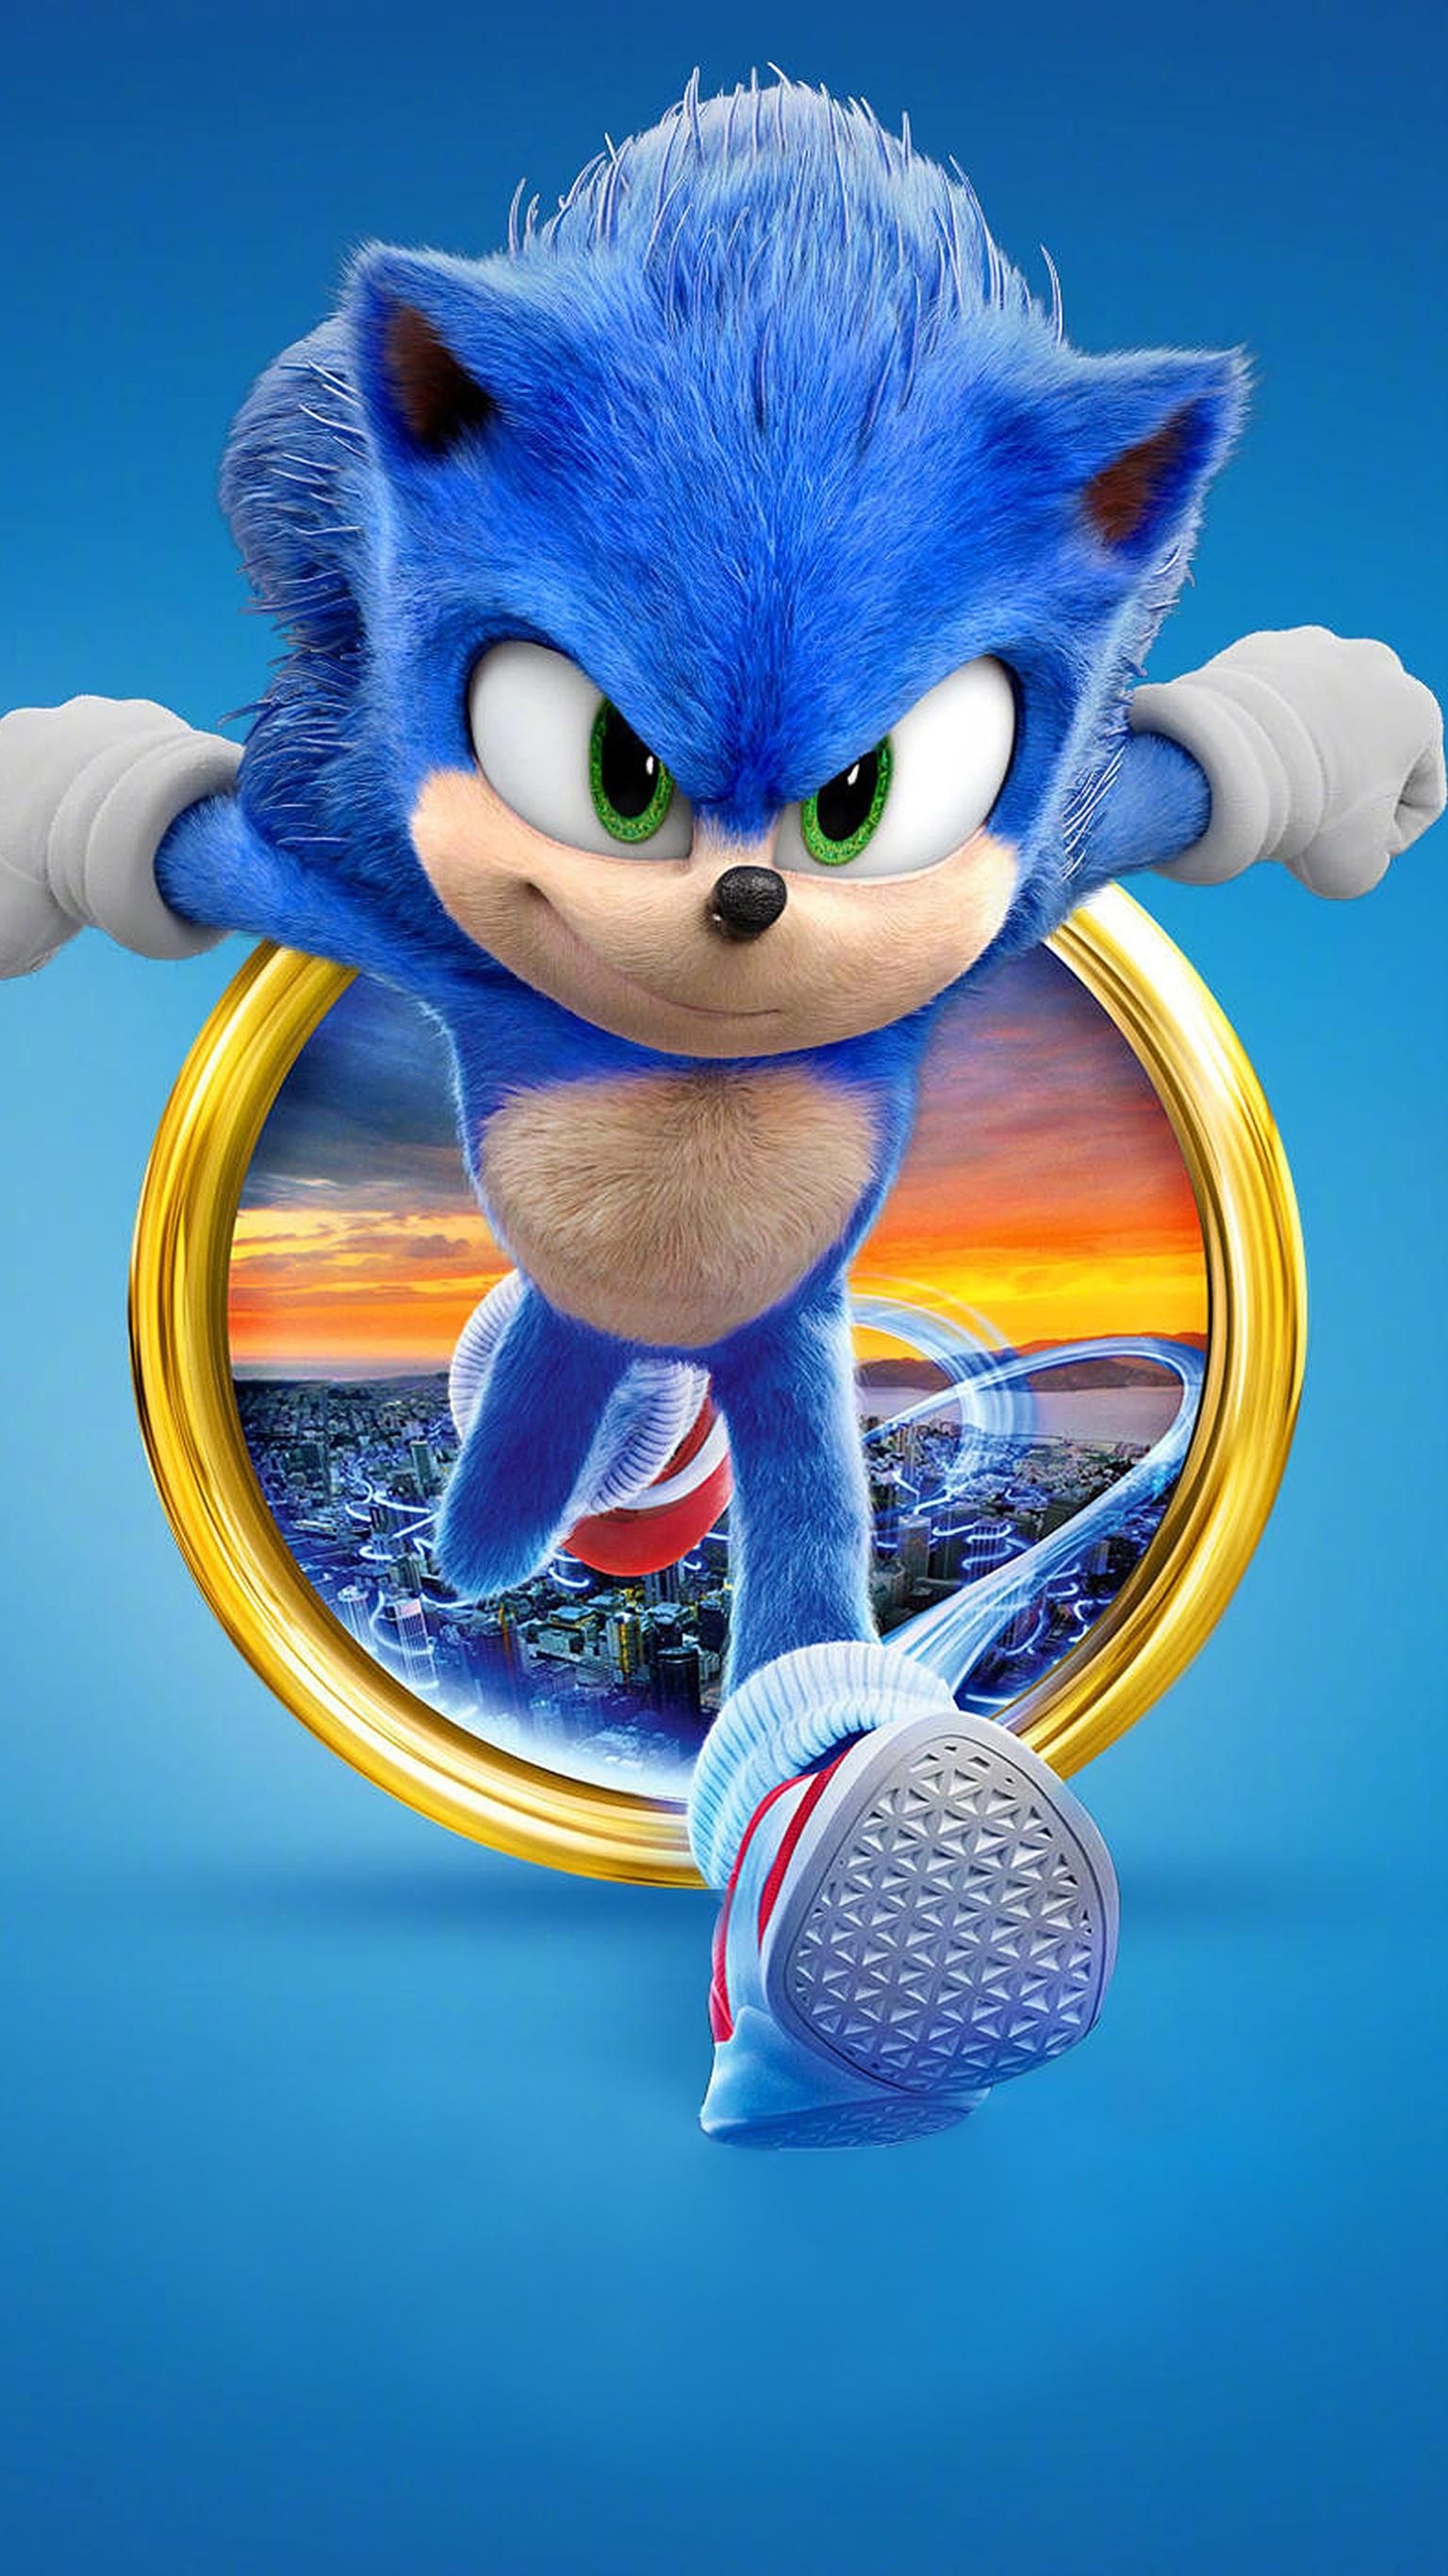 Sonic the Hedgehog 2020 Phone Wallpaper, Festive celebration, Playful animation, Sonic-themed party, 1540x2740 HD Phone